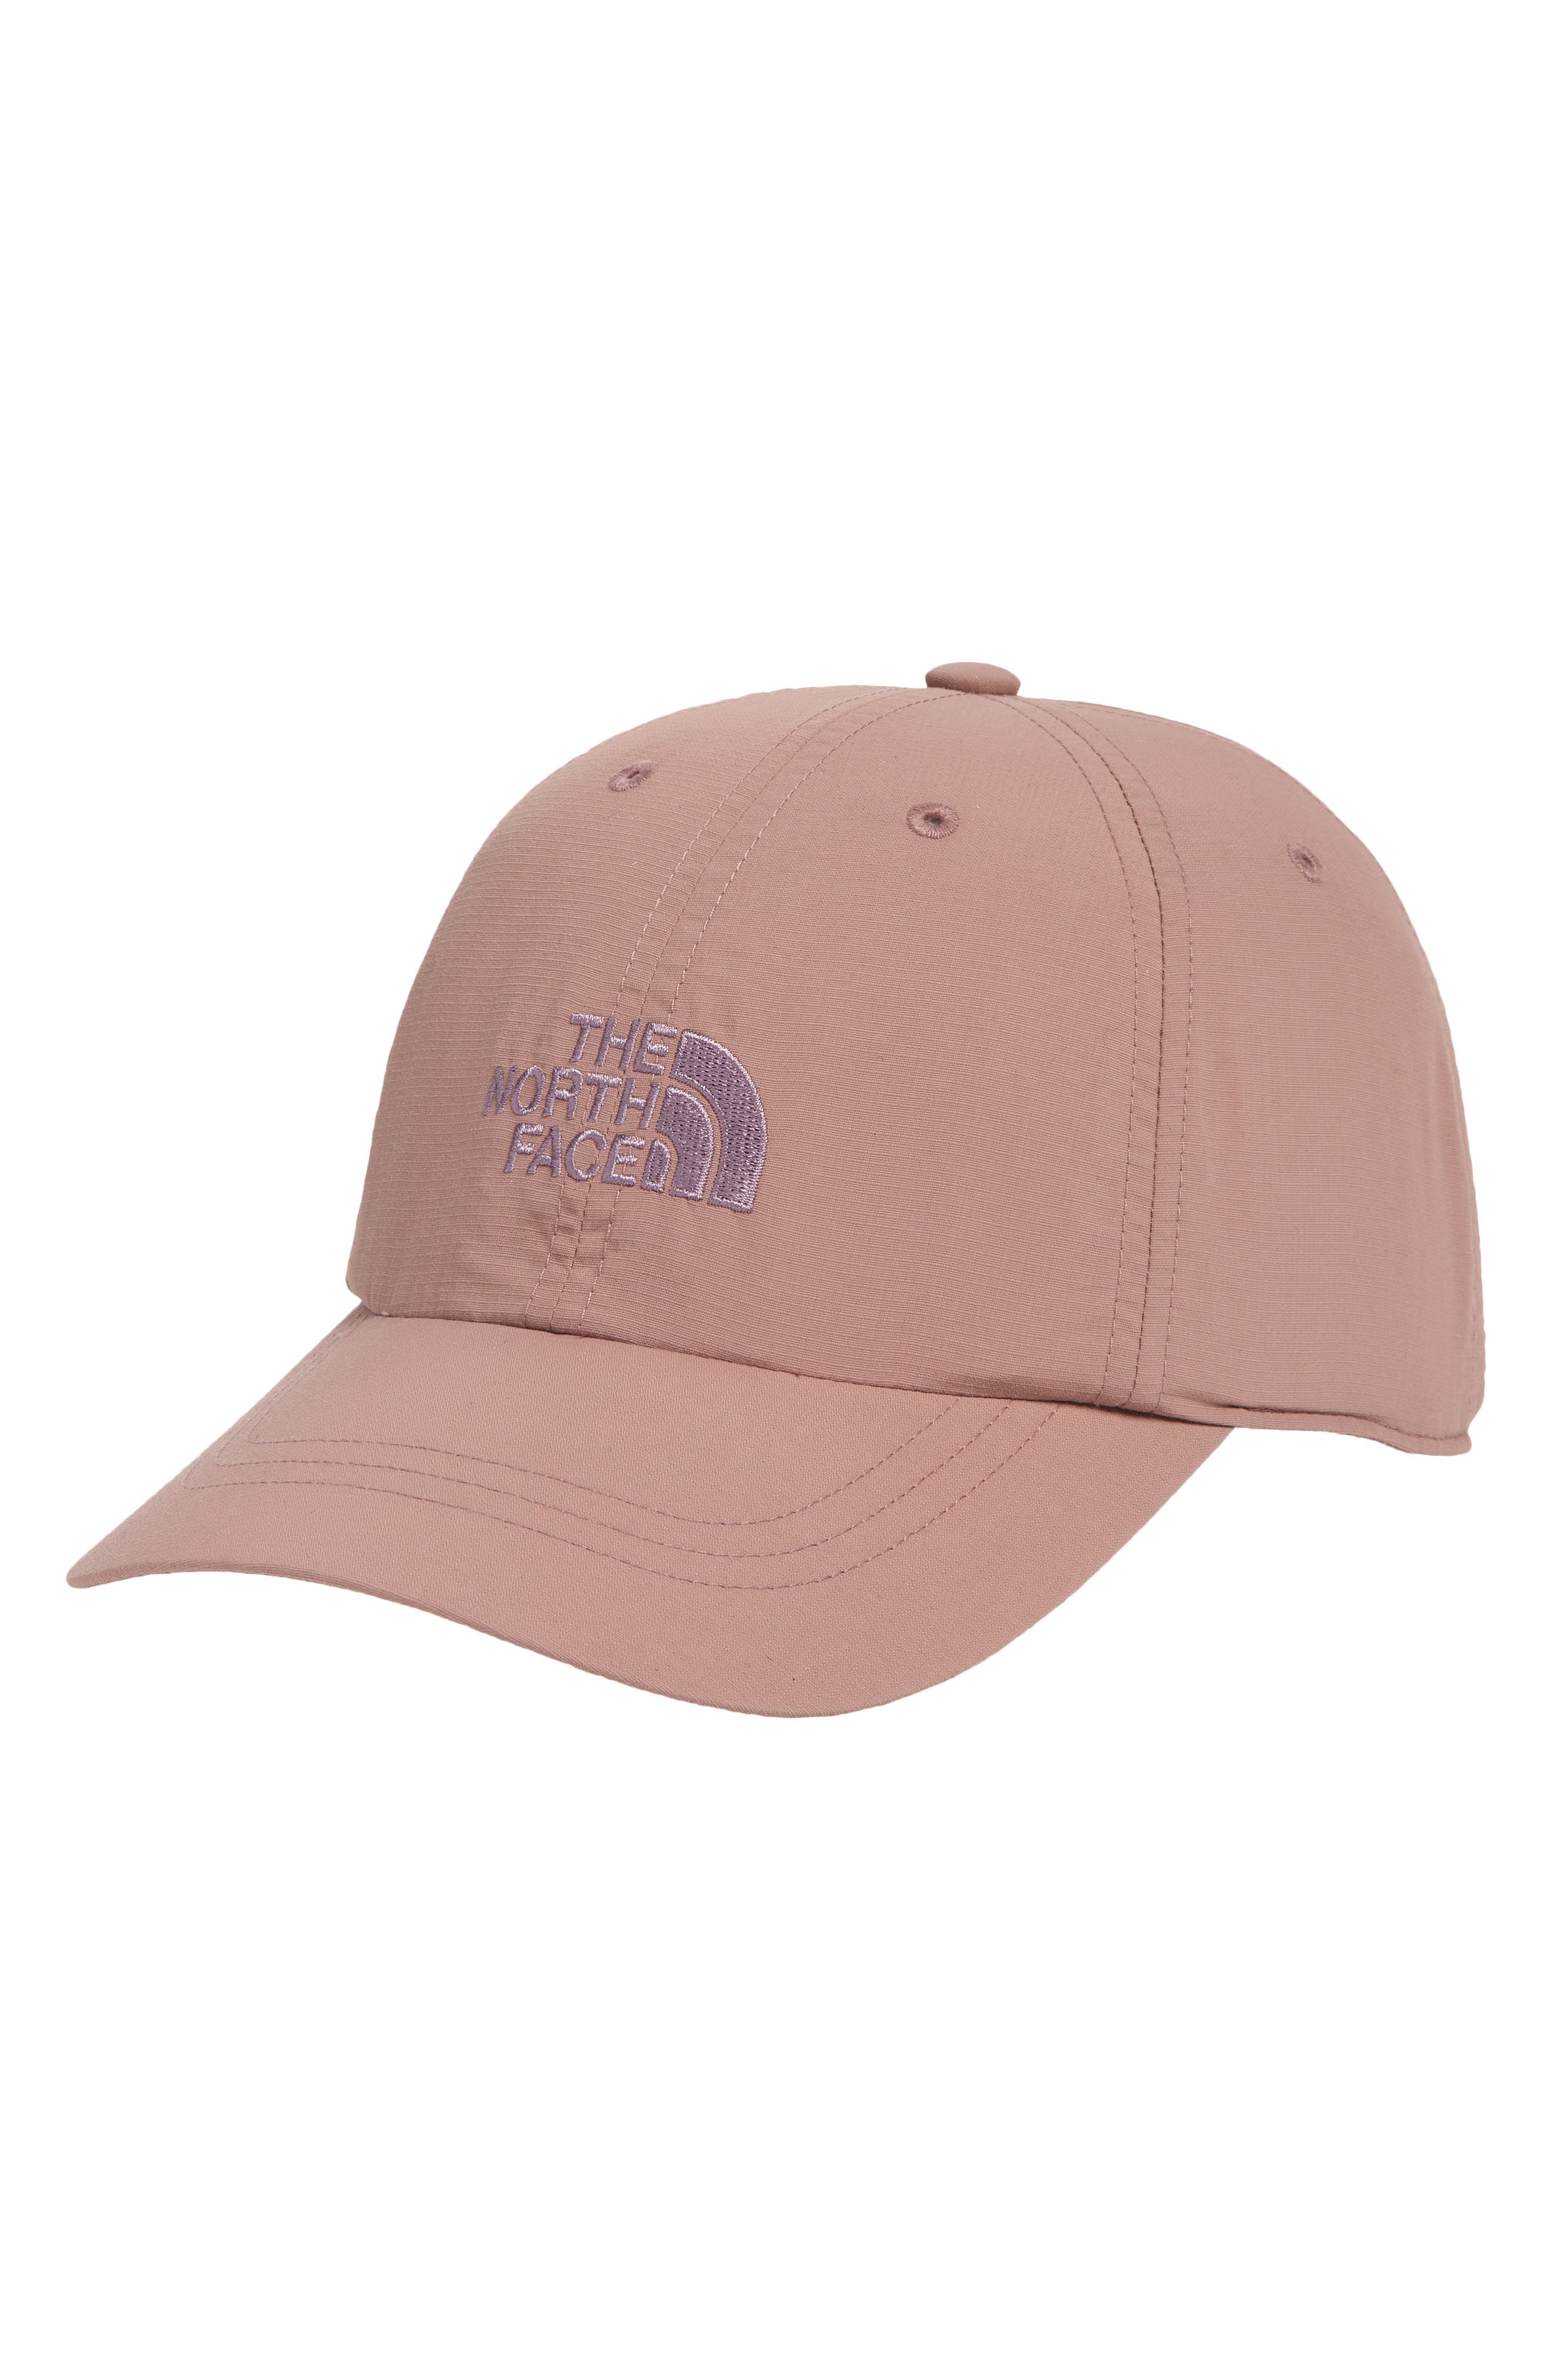 See What's New from The North Face Men's Hats on AccuWeather Shop